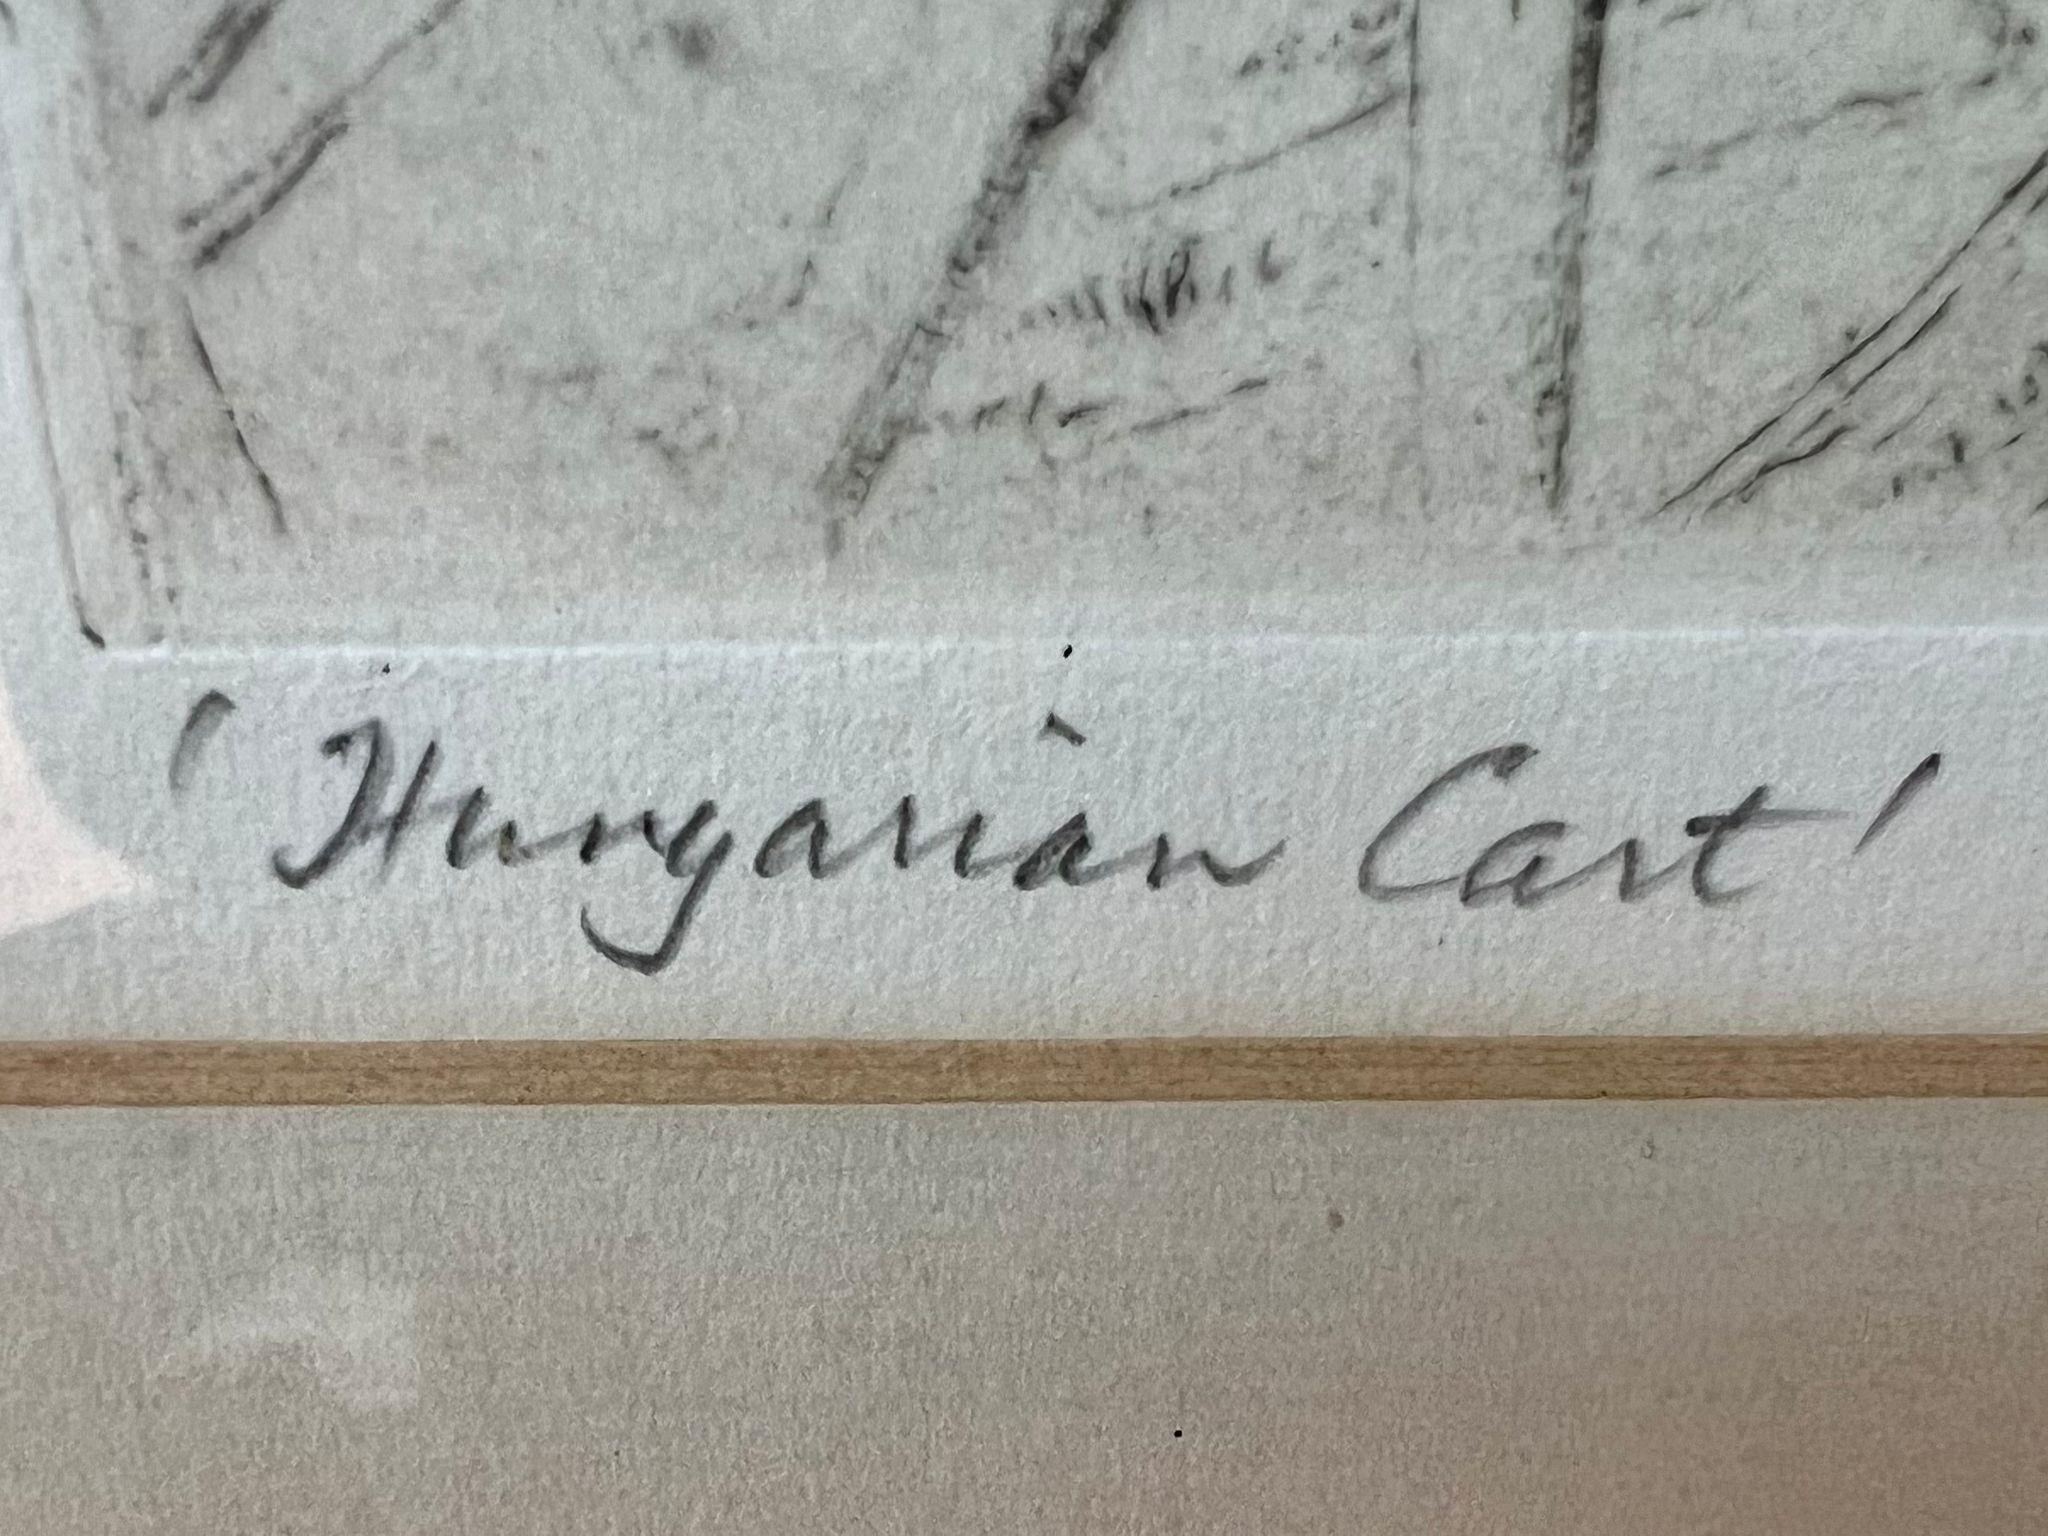 "HUNGARIAN CART" BY H A FREETH (1912 - 1986) A PEN AND INK DRAWING. 22 X 16.5cms frame size 46 x - Image 2 of 3